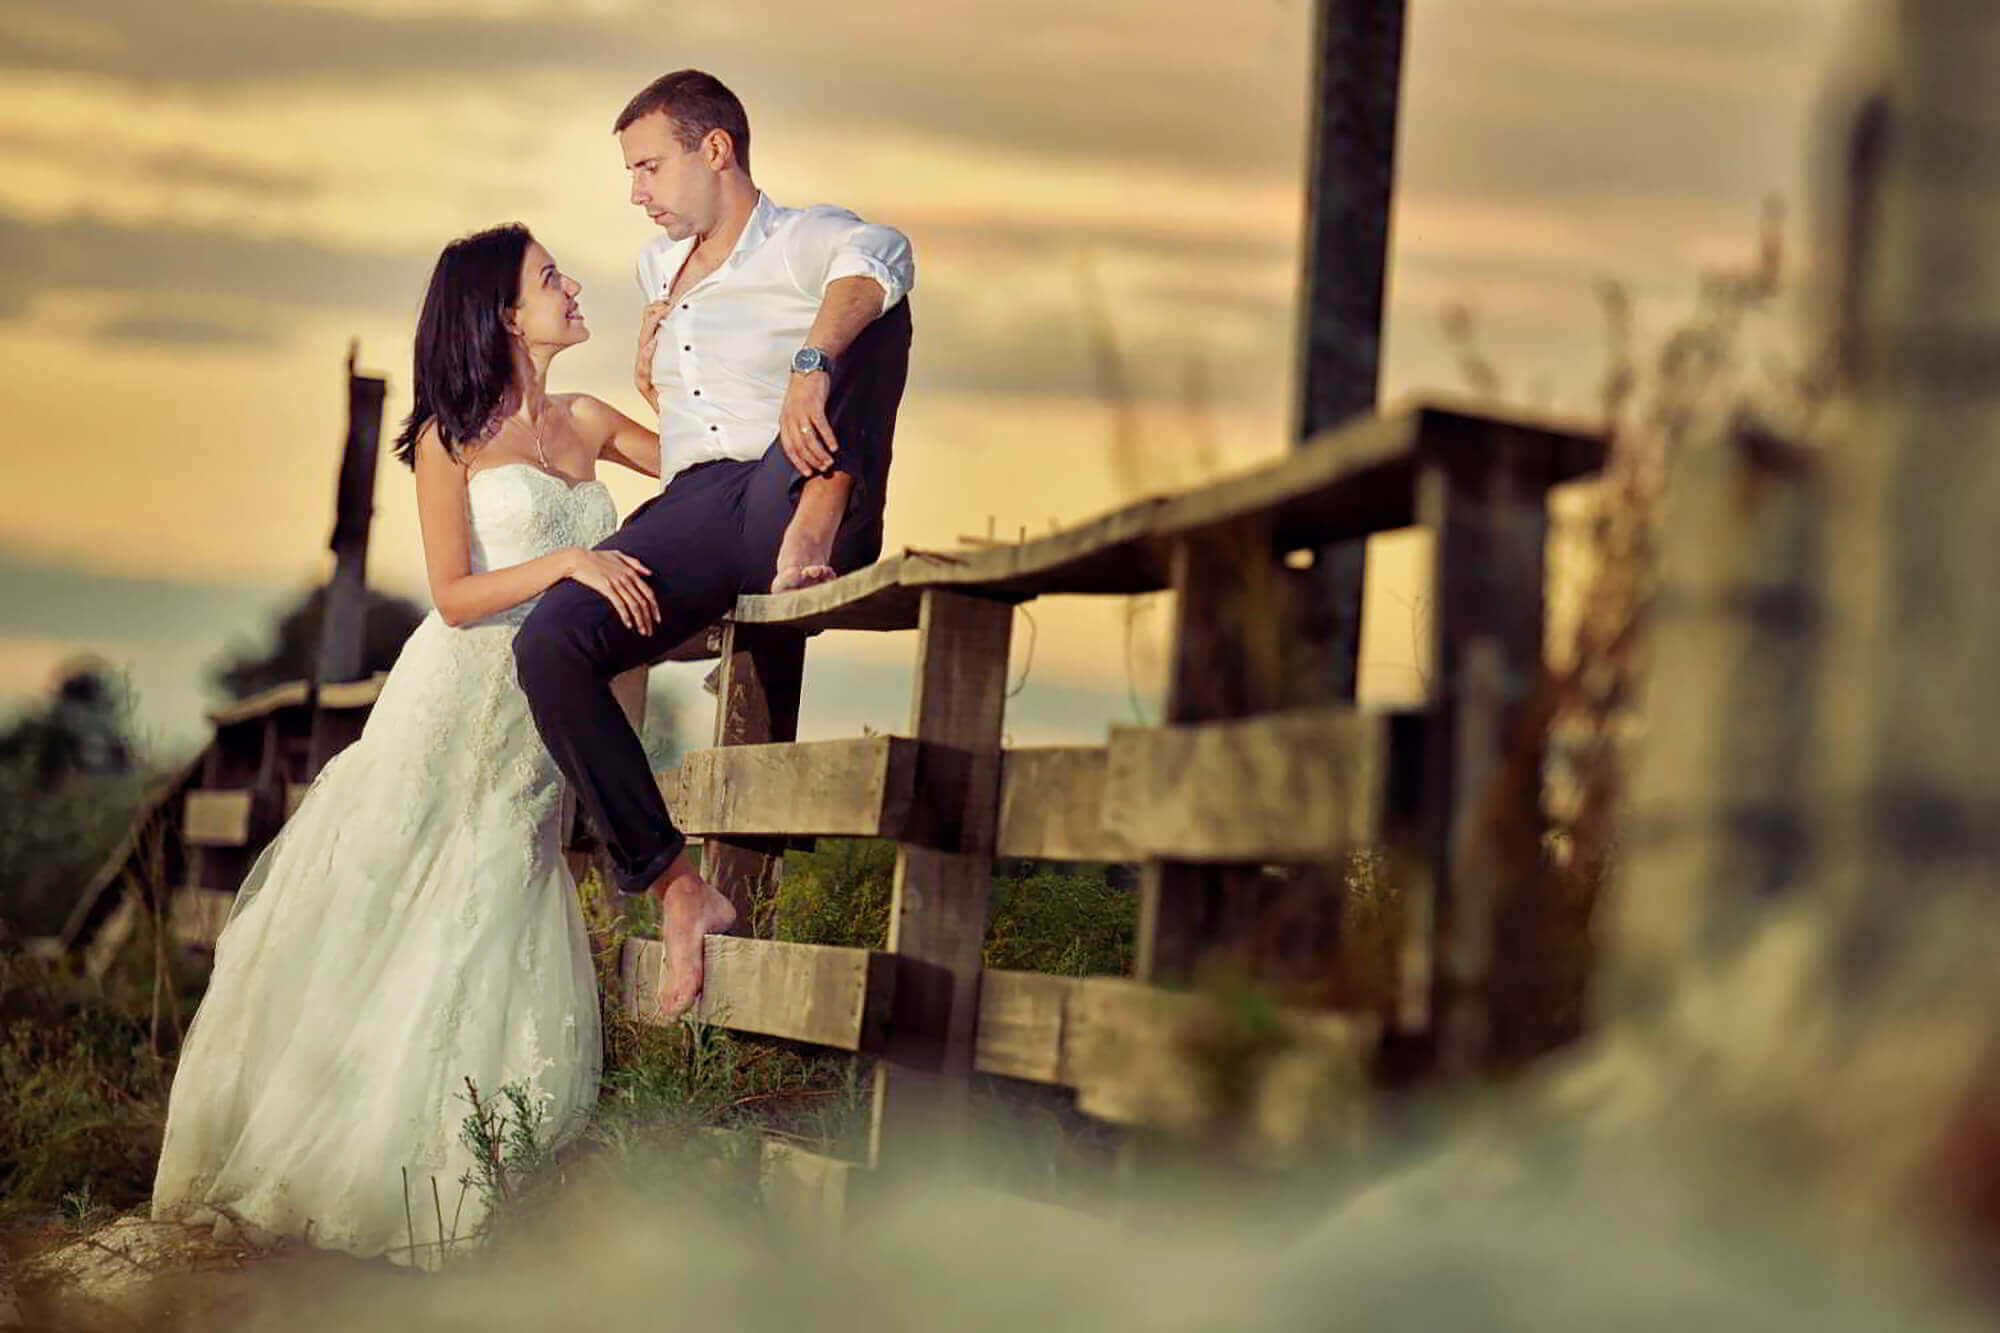 10 Essential Tips for Capturing Stunning Wedding Photos